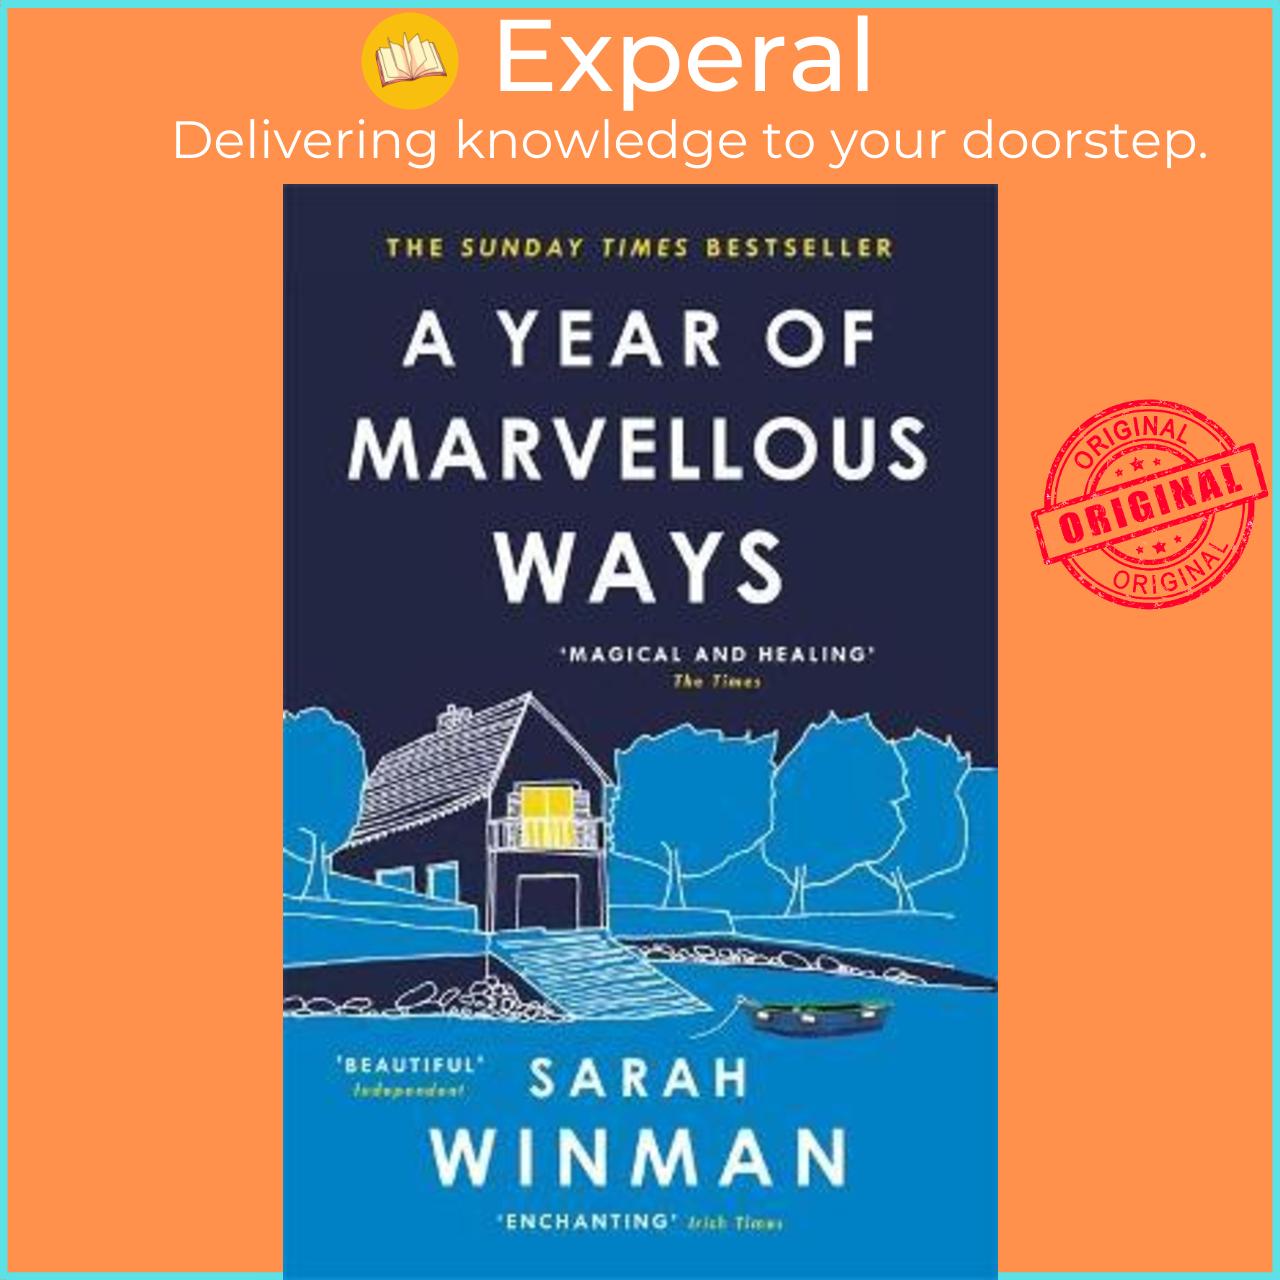 Sách - A Year of Marvellous Ways : The Richard and Judy Bestseller by Sarah Winman (UK edition, paperback)